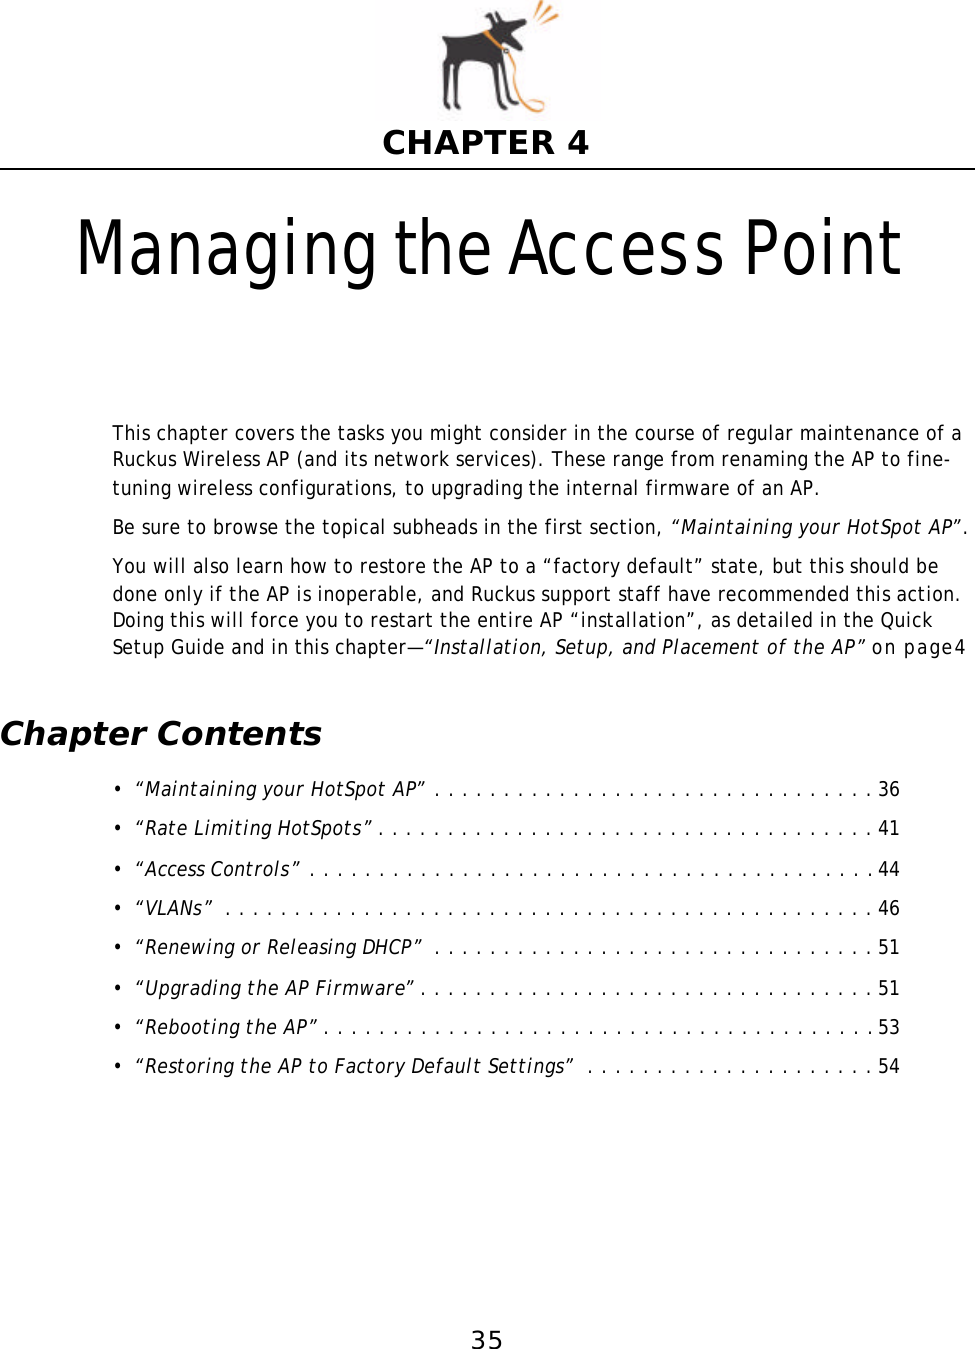 35CHAPTER 4Managing the Access PointThis chapter covers the tasks you might consider in the course of regular maintenance of a Ruckus Wireless AP (and its network services). These range from renaming the AP to fine-tuning wireless configurations, to upgrading the internal firmware of an AP. Be sure to browse the topical subheads in the first section, “Maintaining your HotSpot AP”.You will also learn how to restore the AP to a “factory default” state, but this should be done only if the AP is inoperable, and Ruckus support staff have recommended this action. Doing this will force you to restart the entire AP “installation”, as detailed in the Quick Setup Guide and in this chapter—“Installation, Setup, and Placementof the AP” on page4Chapter Contents•“Maintaining your HotSpot AP” . . . . . . . . . . . . . . . . . . . . . . . . . . . . . . . . 36•“Rate Limiting HotSpots”. . . . . . . . . . . . . . . . . . . . . . . . . . . . . . . . . . . . 41•“Access Controls” . . . . . . . . . . . . . . . . . . . . . . . . . . . . . . . . . . . . . . . . .44•“VLANs” . . . . . . . . . . . . . . . . . . . . . . . . . . . . . . . . . . . . . . . . . . . . . . . 46•“Renewing or Releasing DHCP” . . . . . . . . . . . . . . . . . . . . . . . . . . . . . . . . 51•“Upgrading the AP Firmware”. . . . . . . . . . . . . . . . . . . . . . . . . . . . . . . . . 51•“Rebooting the AP”. . . . . . . . . . . . . . . . . . . . . . . . . . . . . . . . . . . . . . . .53•“Restoring the AP to Factory Default Settings” . . . . . . . . . . . . . . . . . . . . . 54